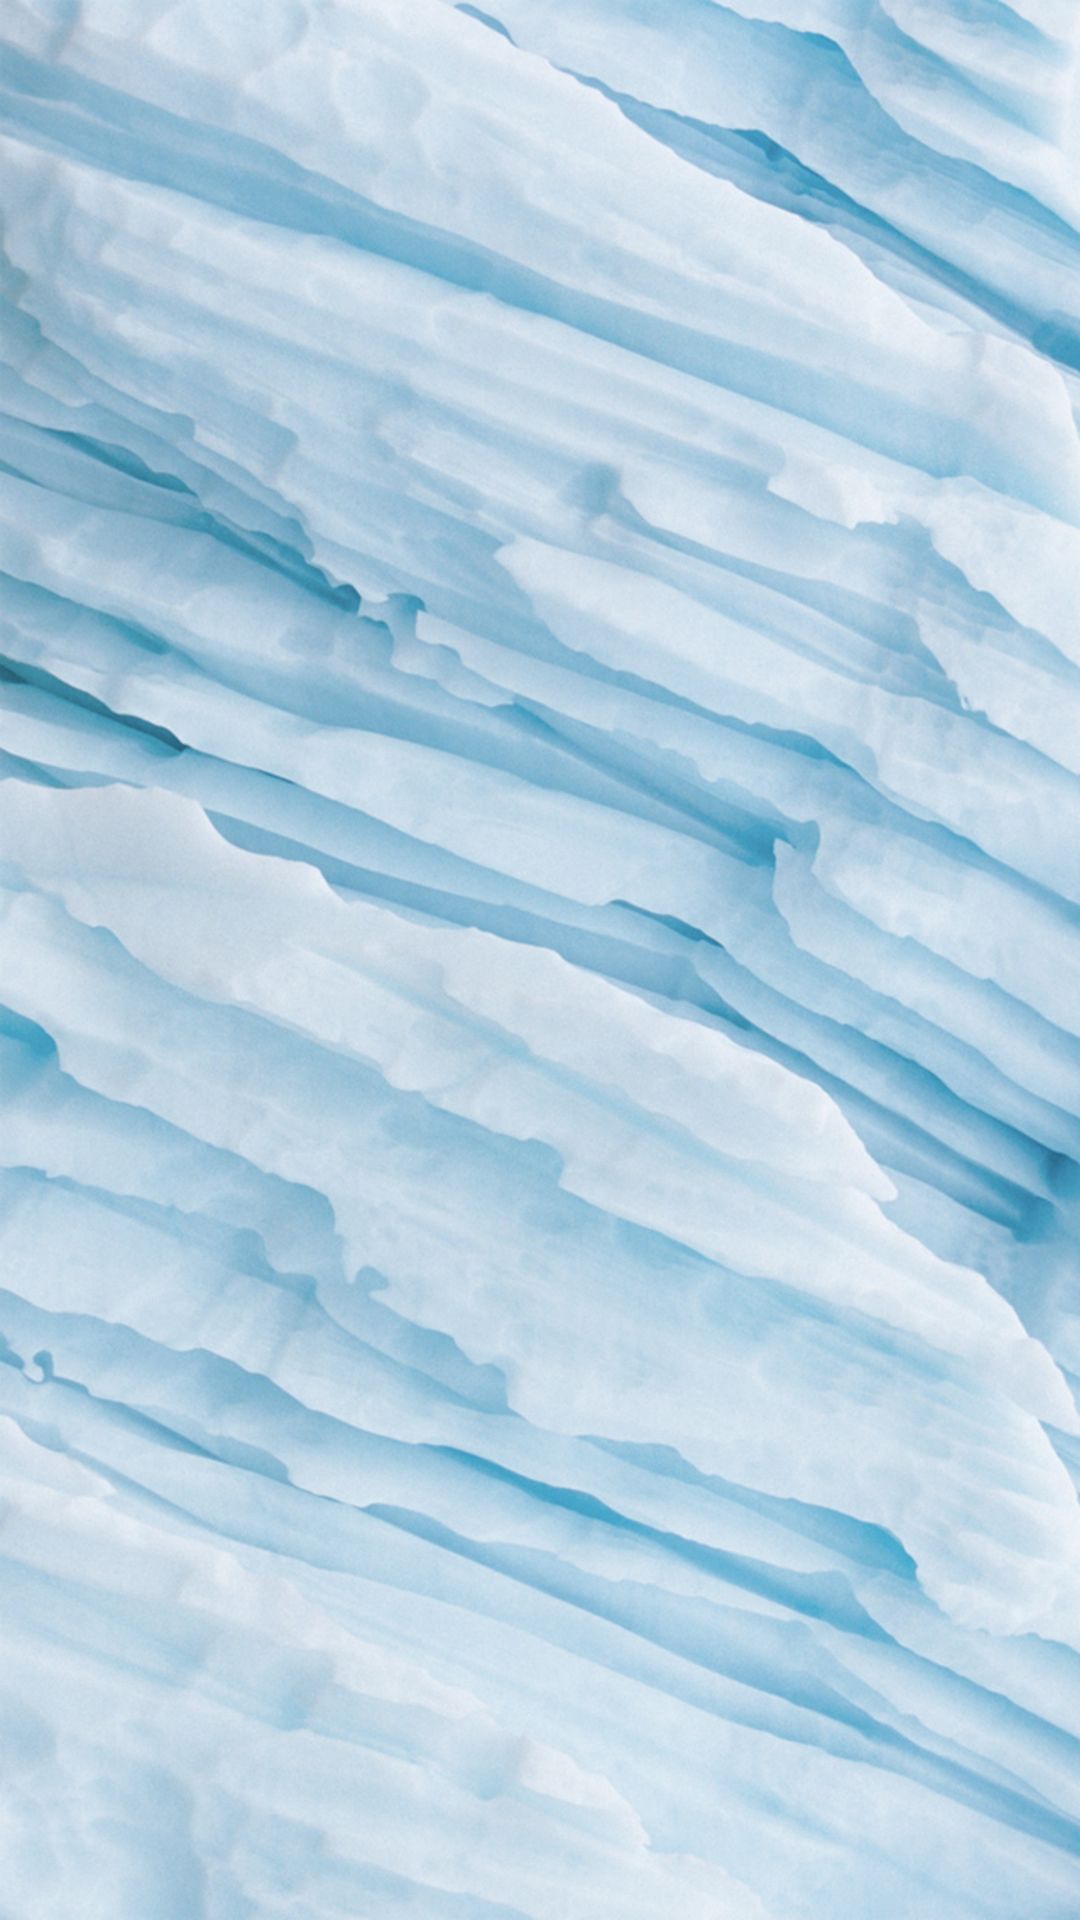 IPhone wallpaper with a close-up of ice formations. - Light blue